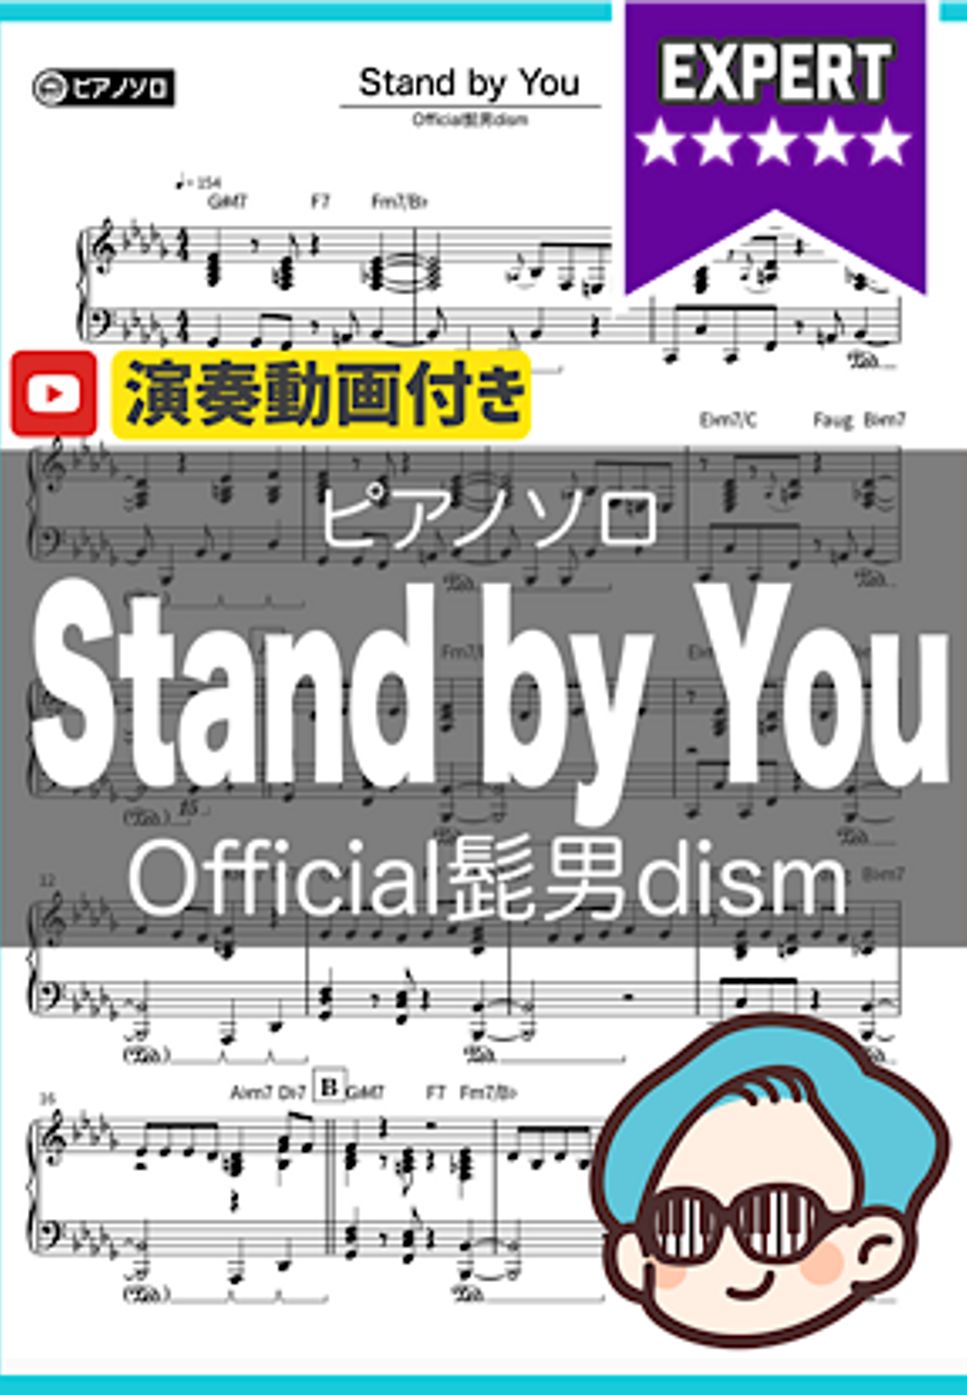 Official髭男dism - Stand by you by THETA